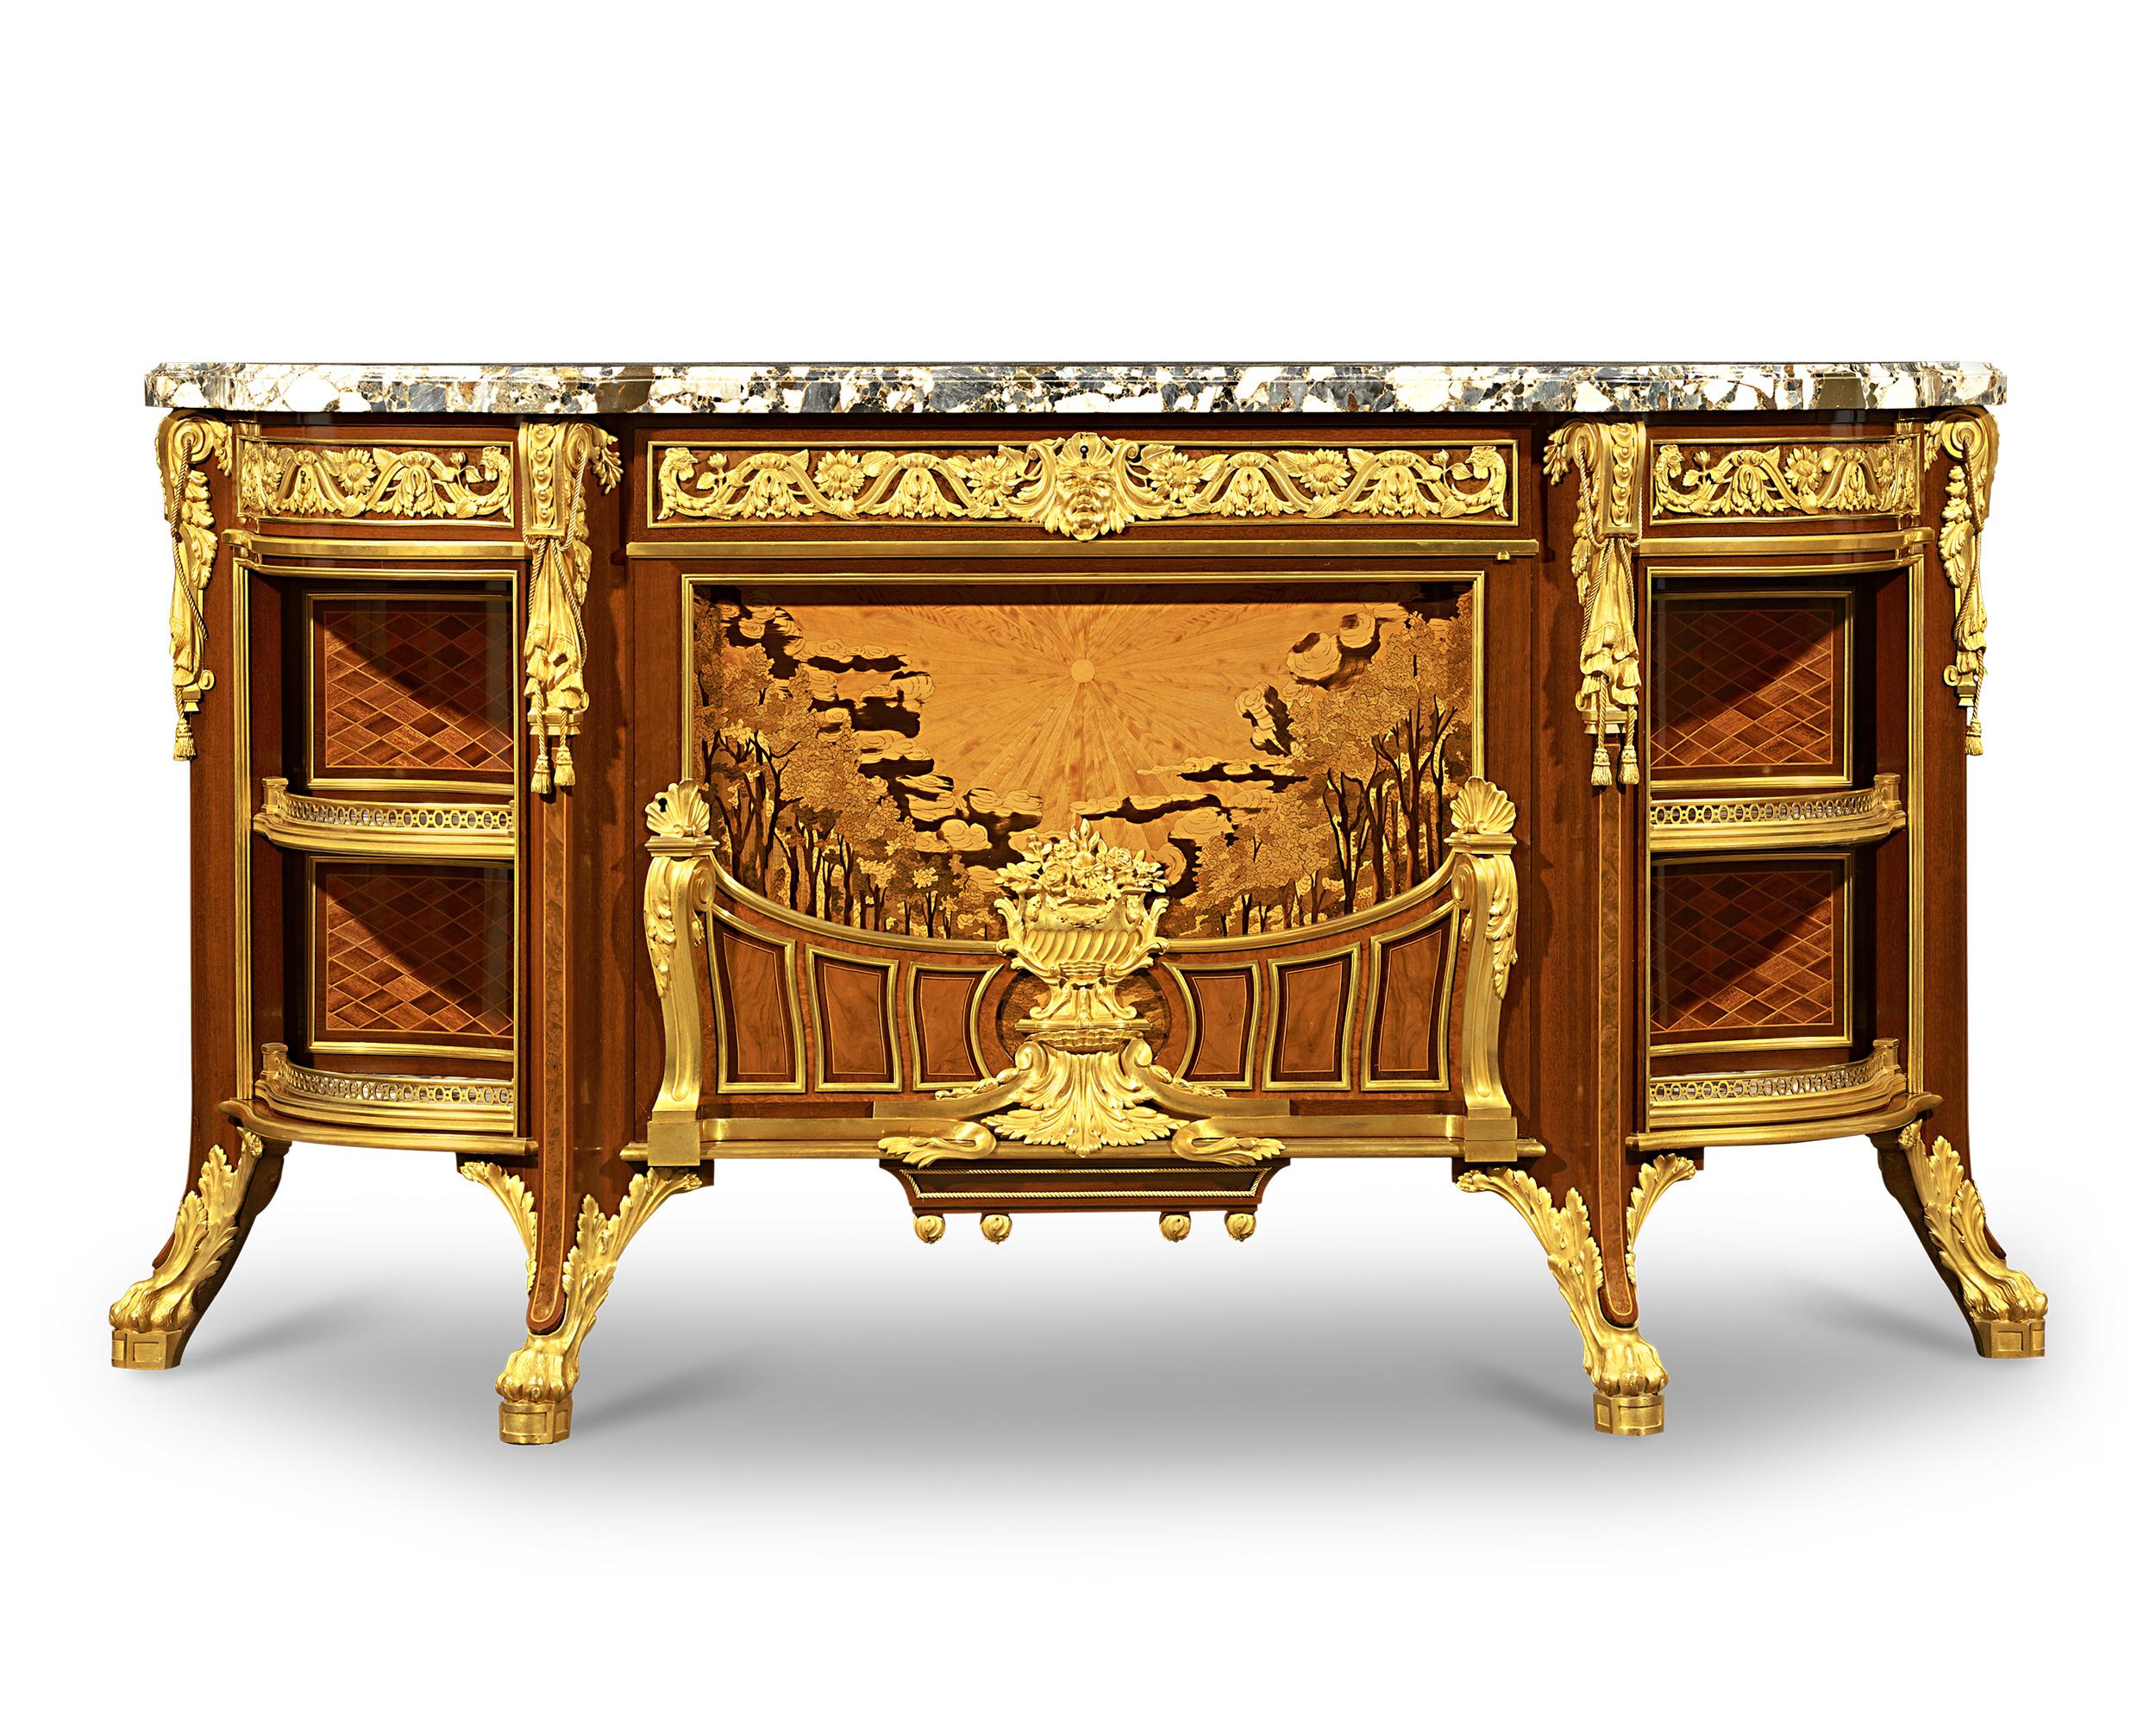 One of only three of its kind, this commode was crafted by the famed and highly celebrated ébéniste François Linke. Blending the stunning marquetry of the Louis XV and XVI styles with the elegance of Art Nouveau, the commode exemplifies Linke's